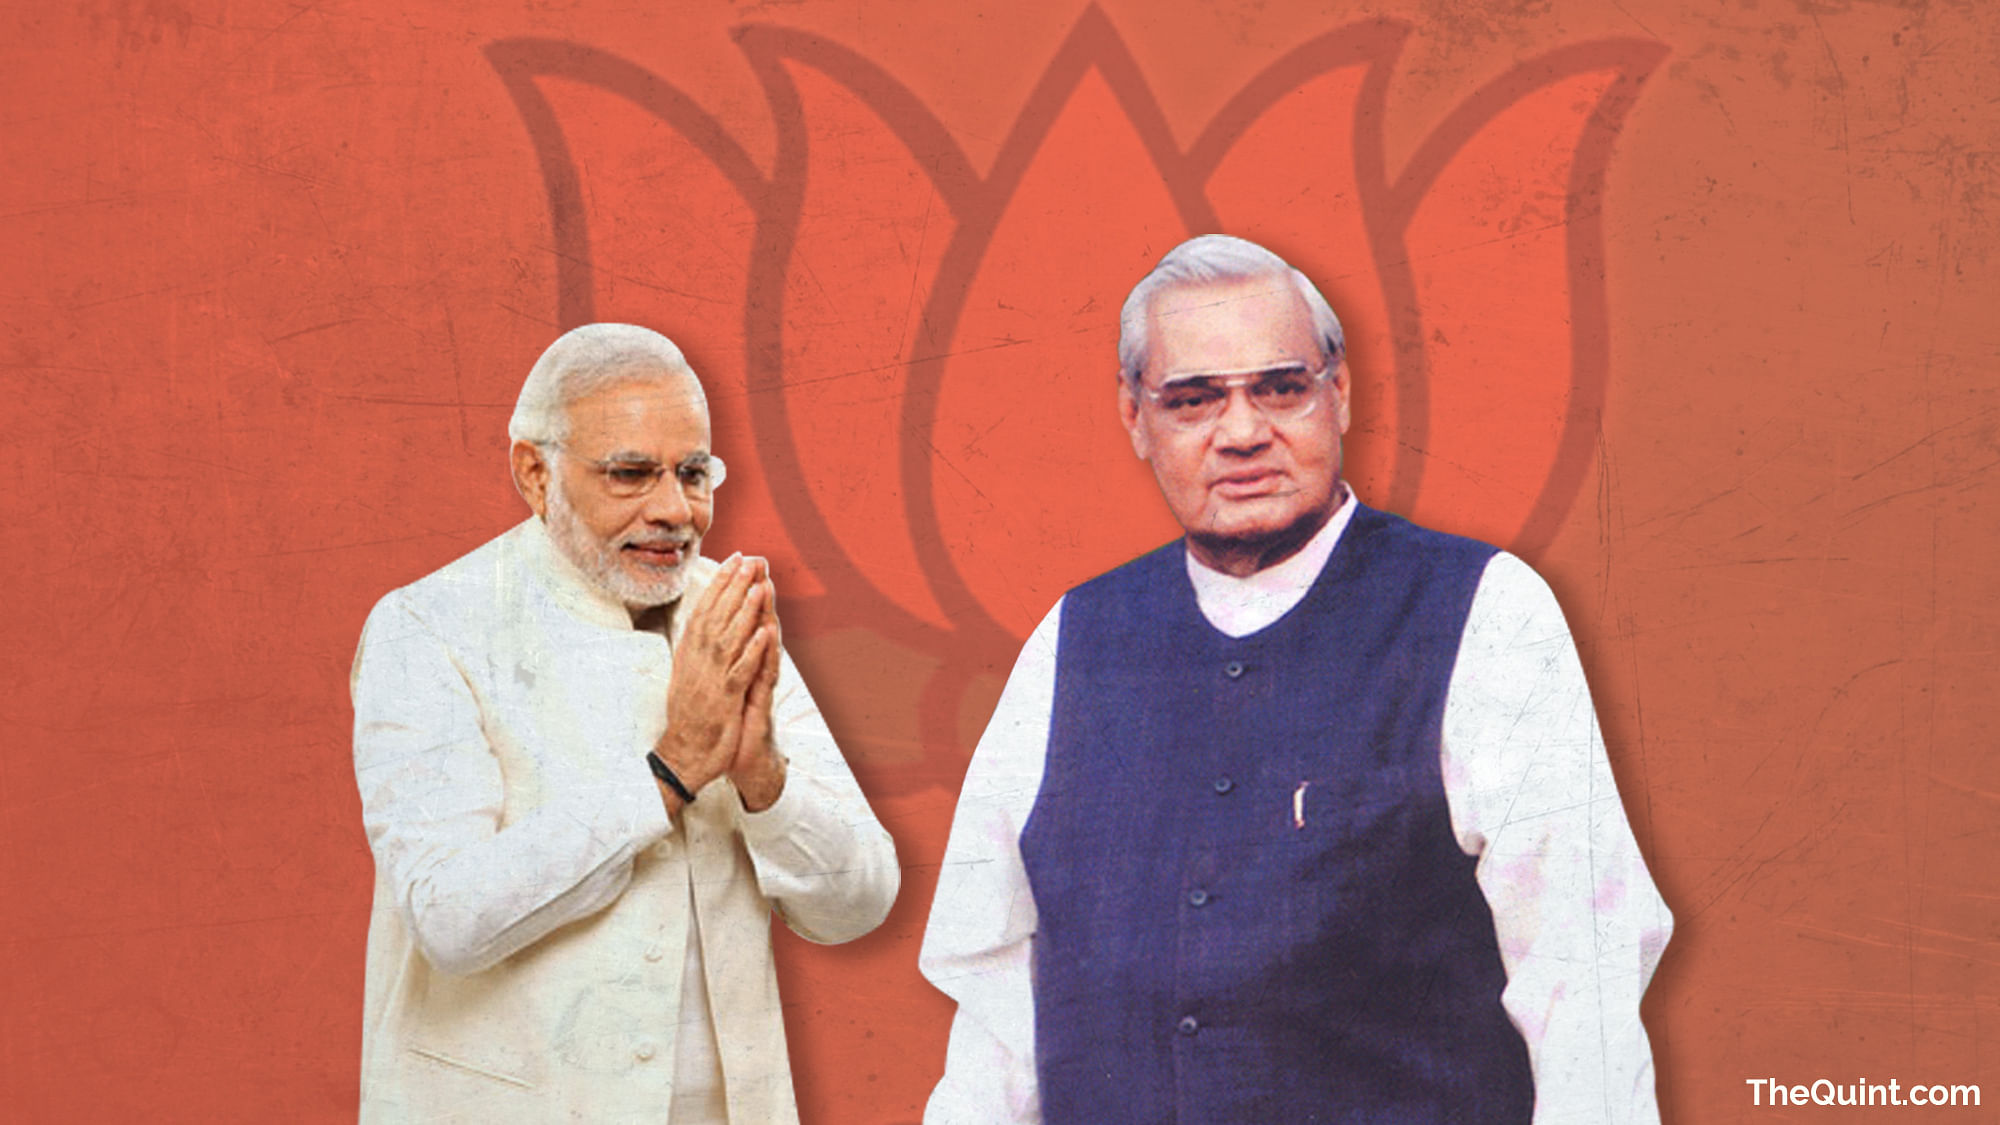 

Modi’s true tribute to Vajpayee on his 92nd birthday would be to adopt his fine qualities. (Photo: Harsh Sahani/<b>The Quint</b>)